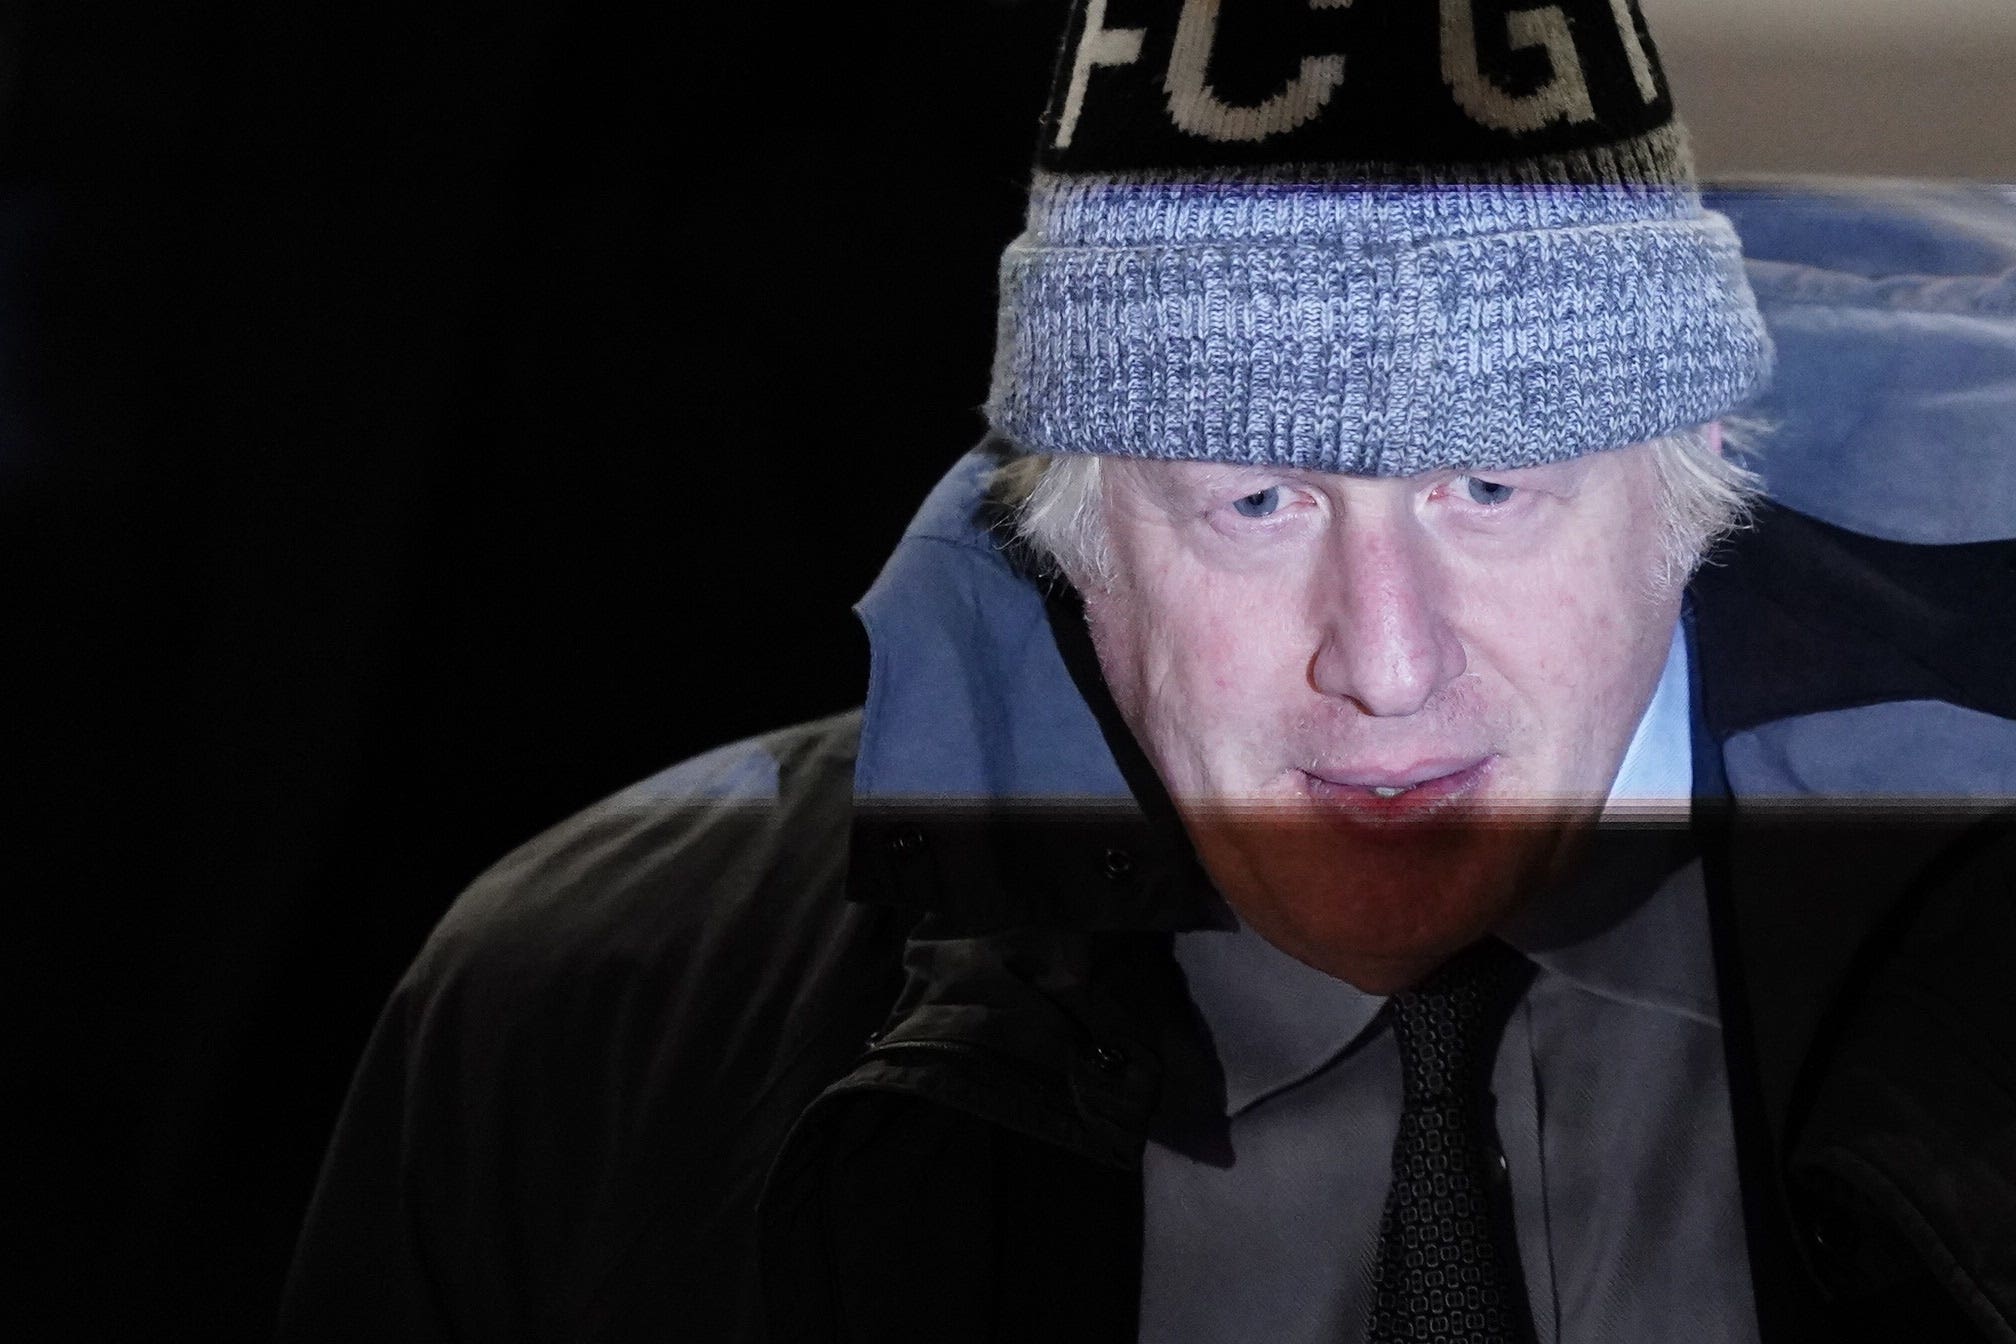 Boris Johnson apologised for his language in an appearance at the Covid-19 Inquiry (Jordan Pettitt/PA)